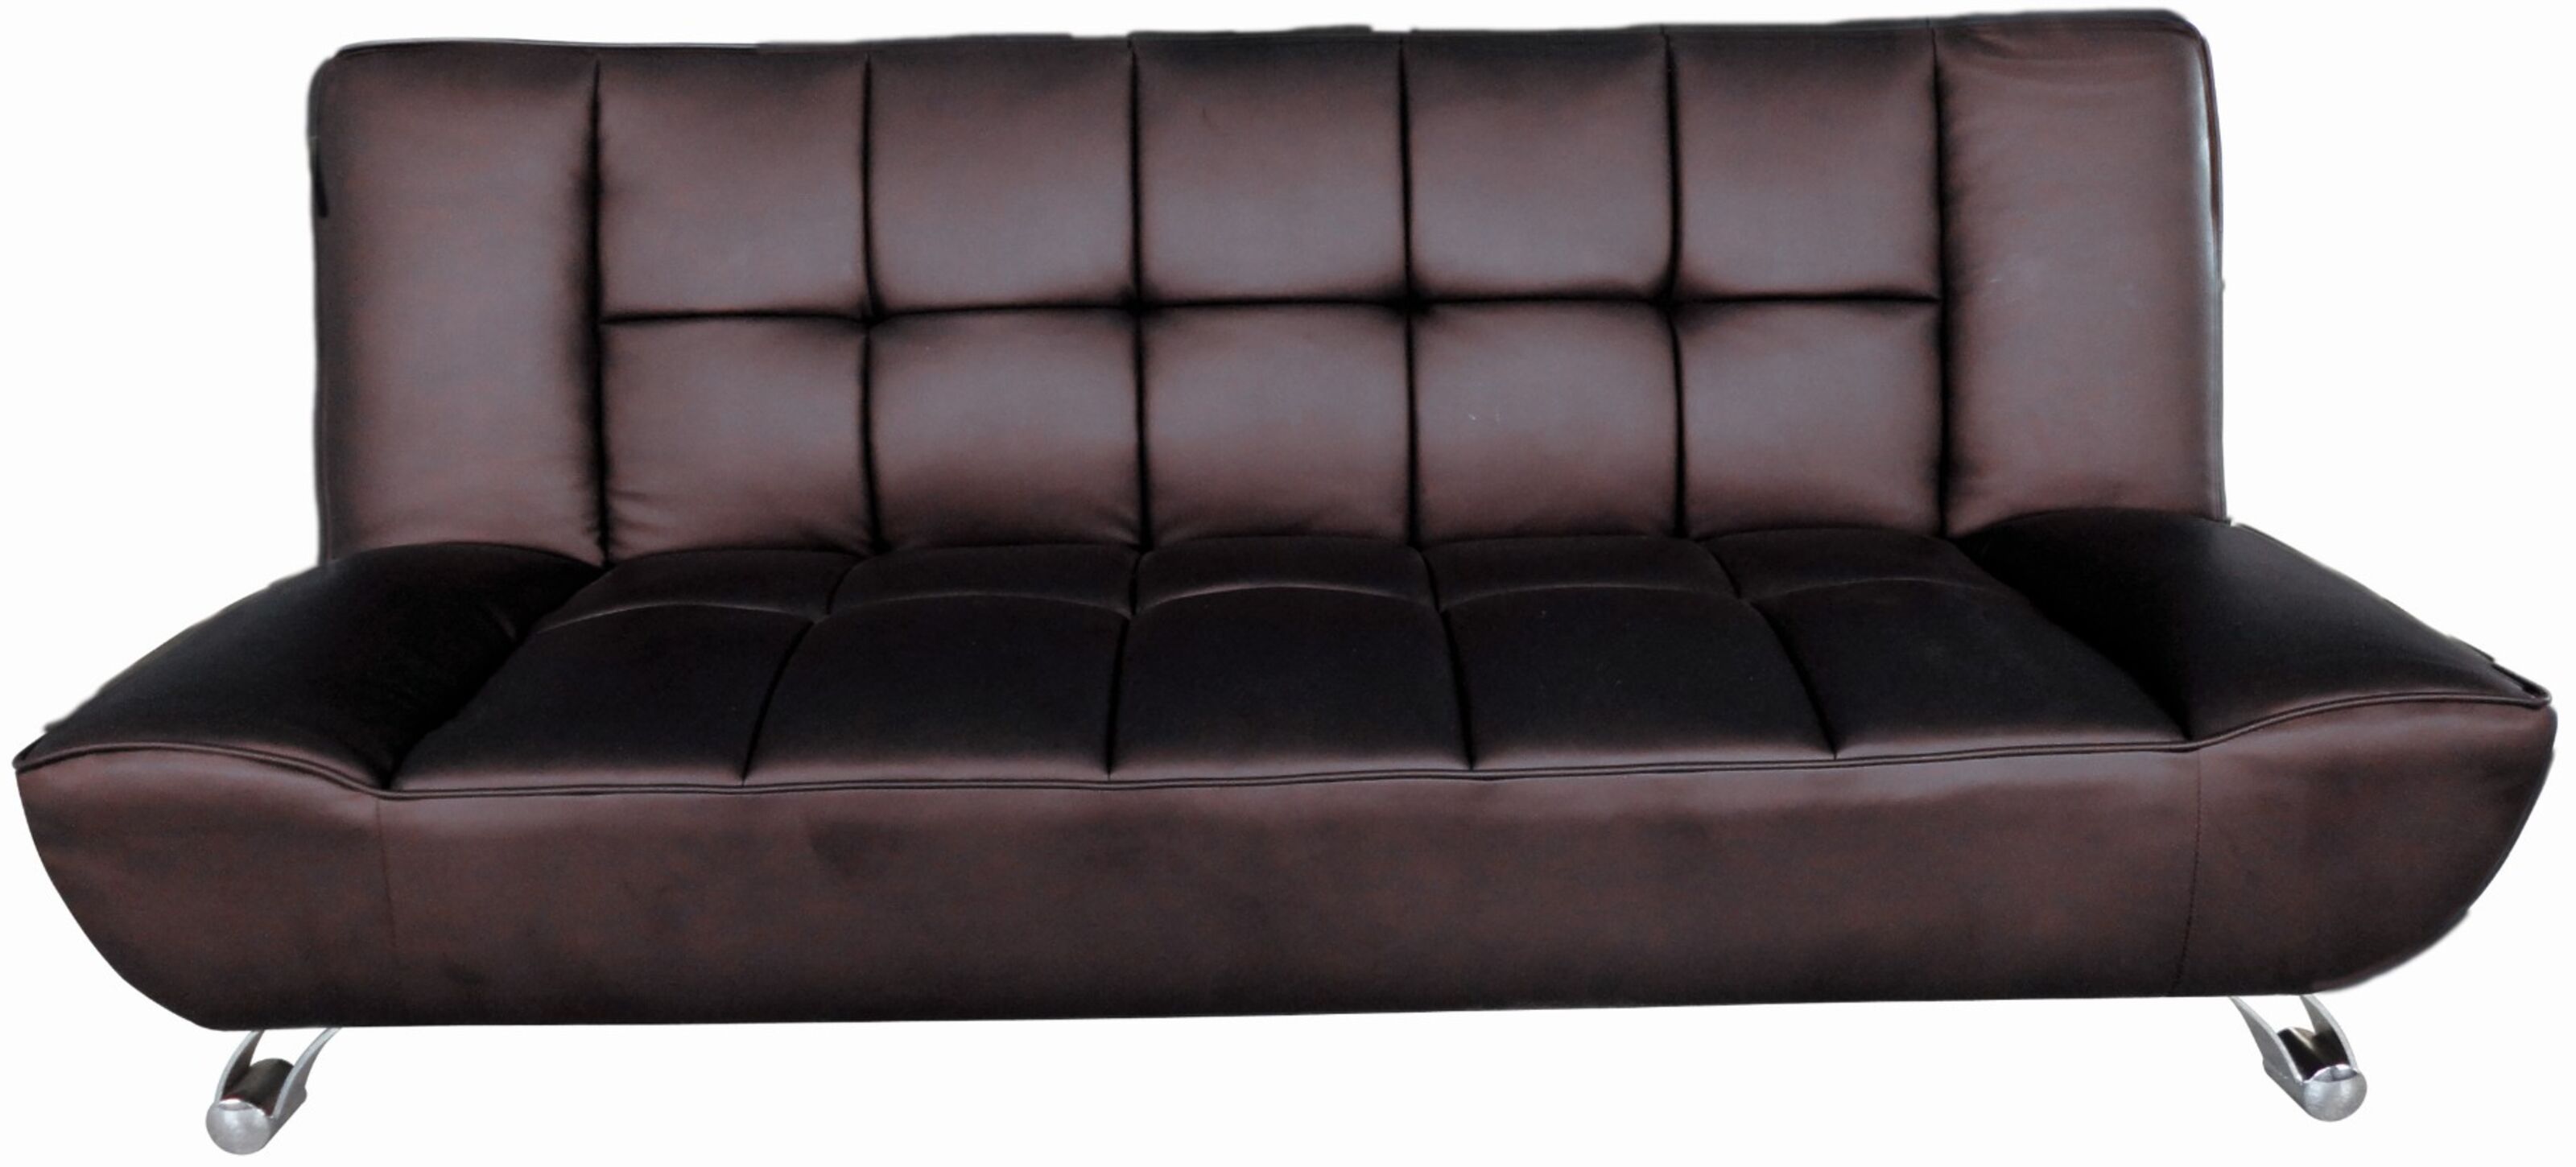 Agata Brown Faux Leather Sofa Bed With, Brown Leather Bed Sofa